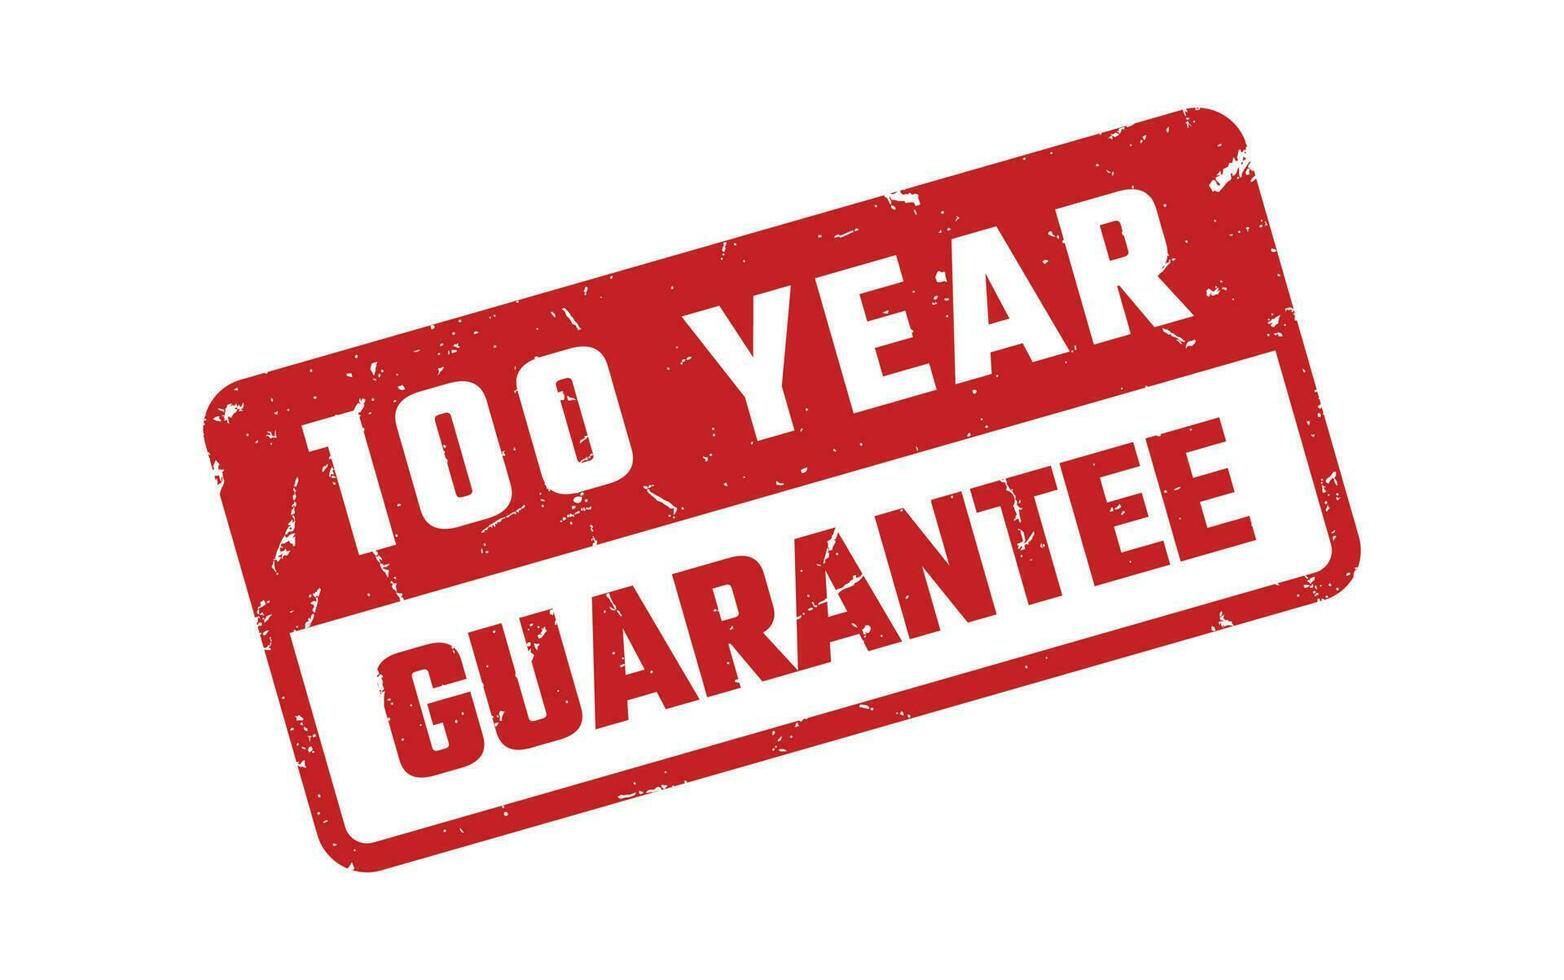 100 Year Guarantee Rubber Stamp vector